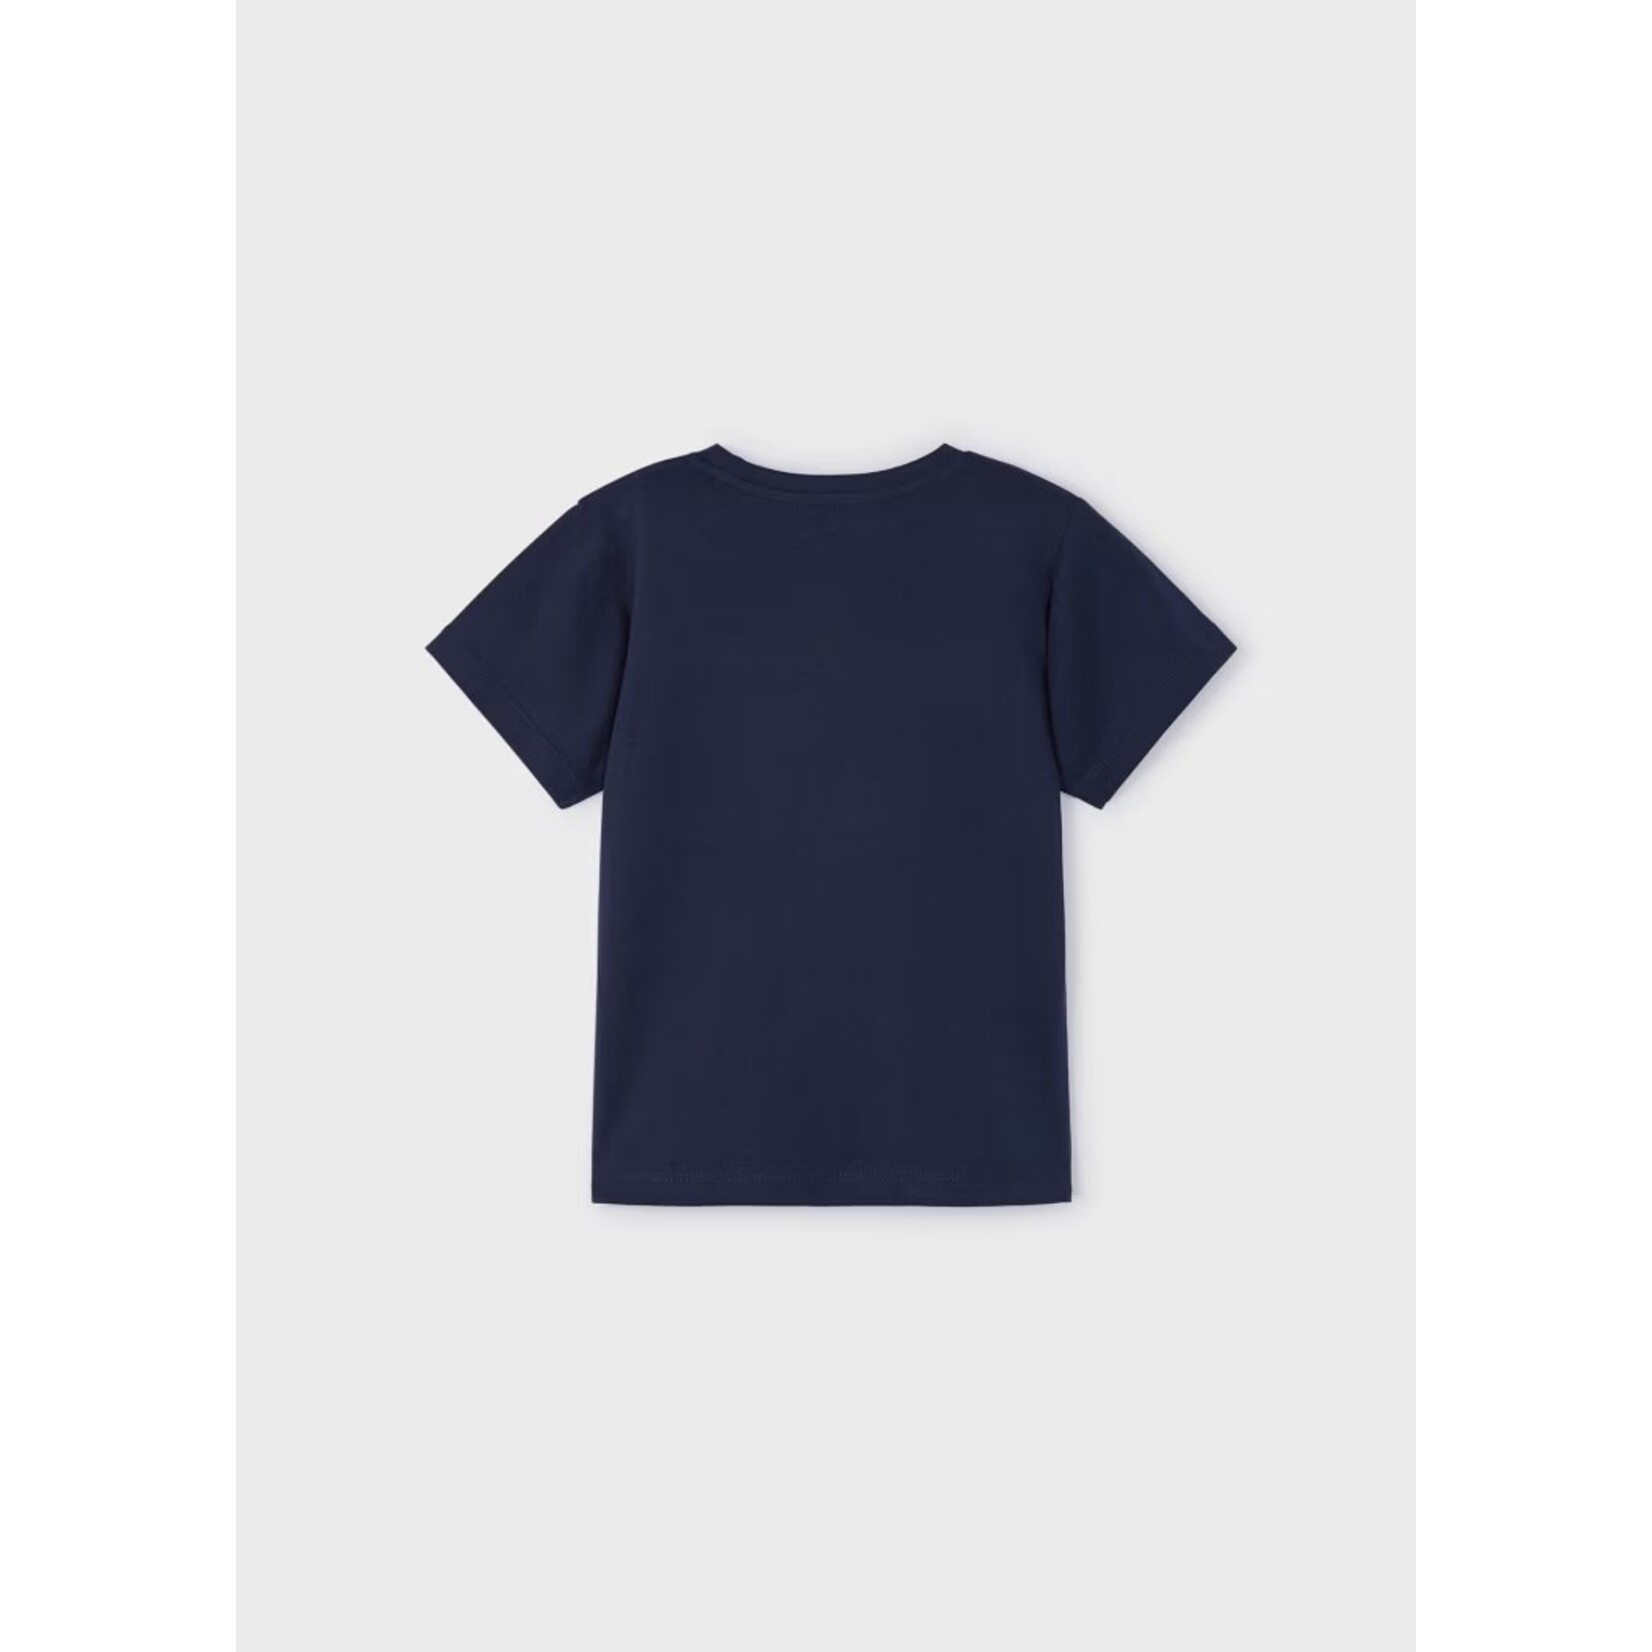 Mayoral MAYORAL - Navy short-sleeved t-shirt with landscape photography print